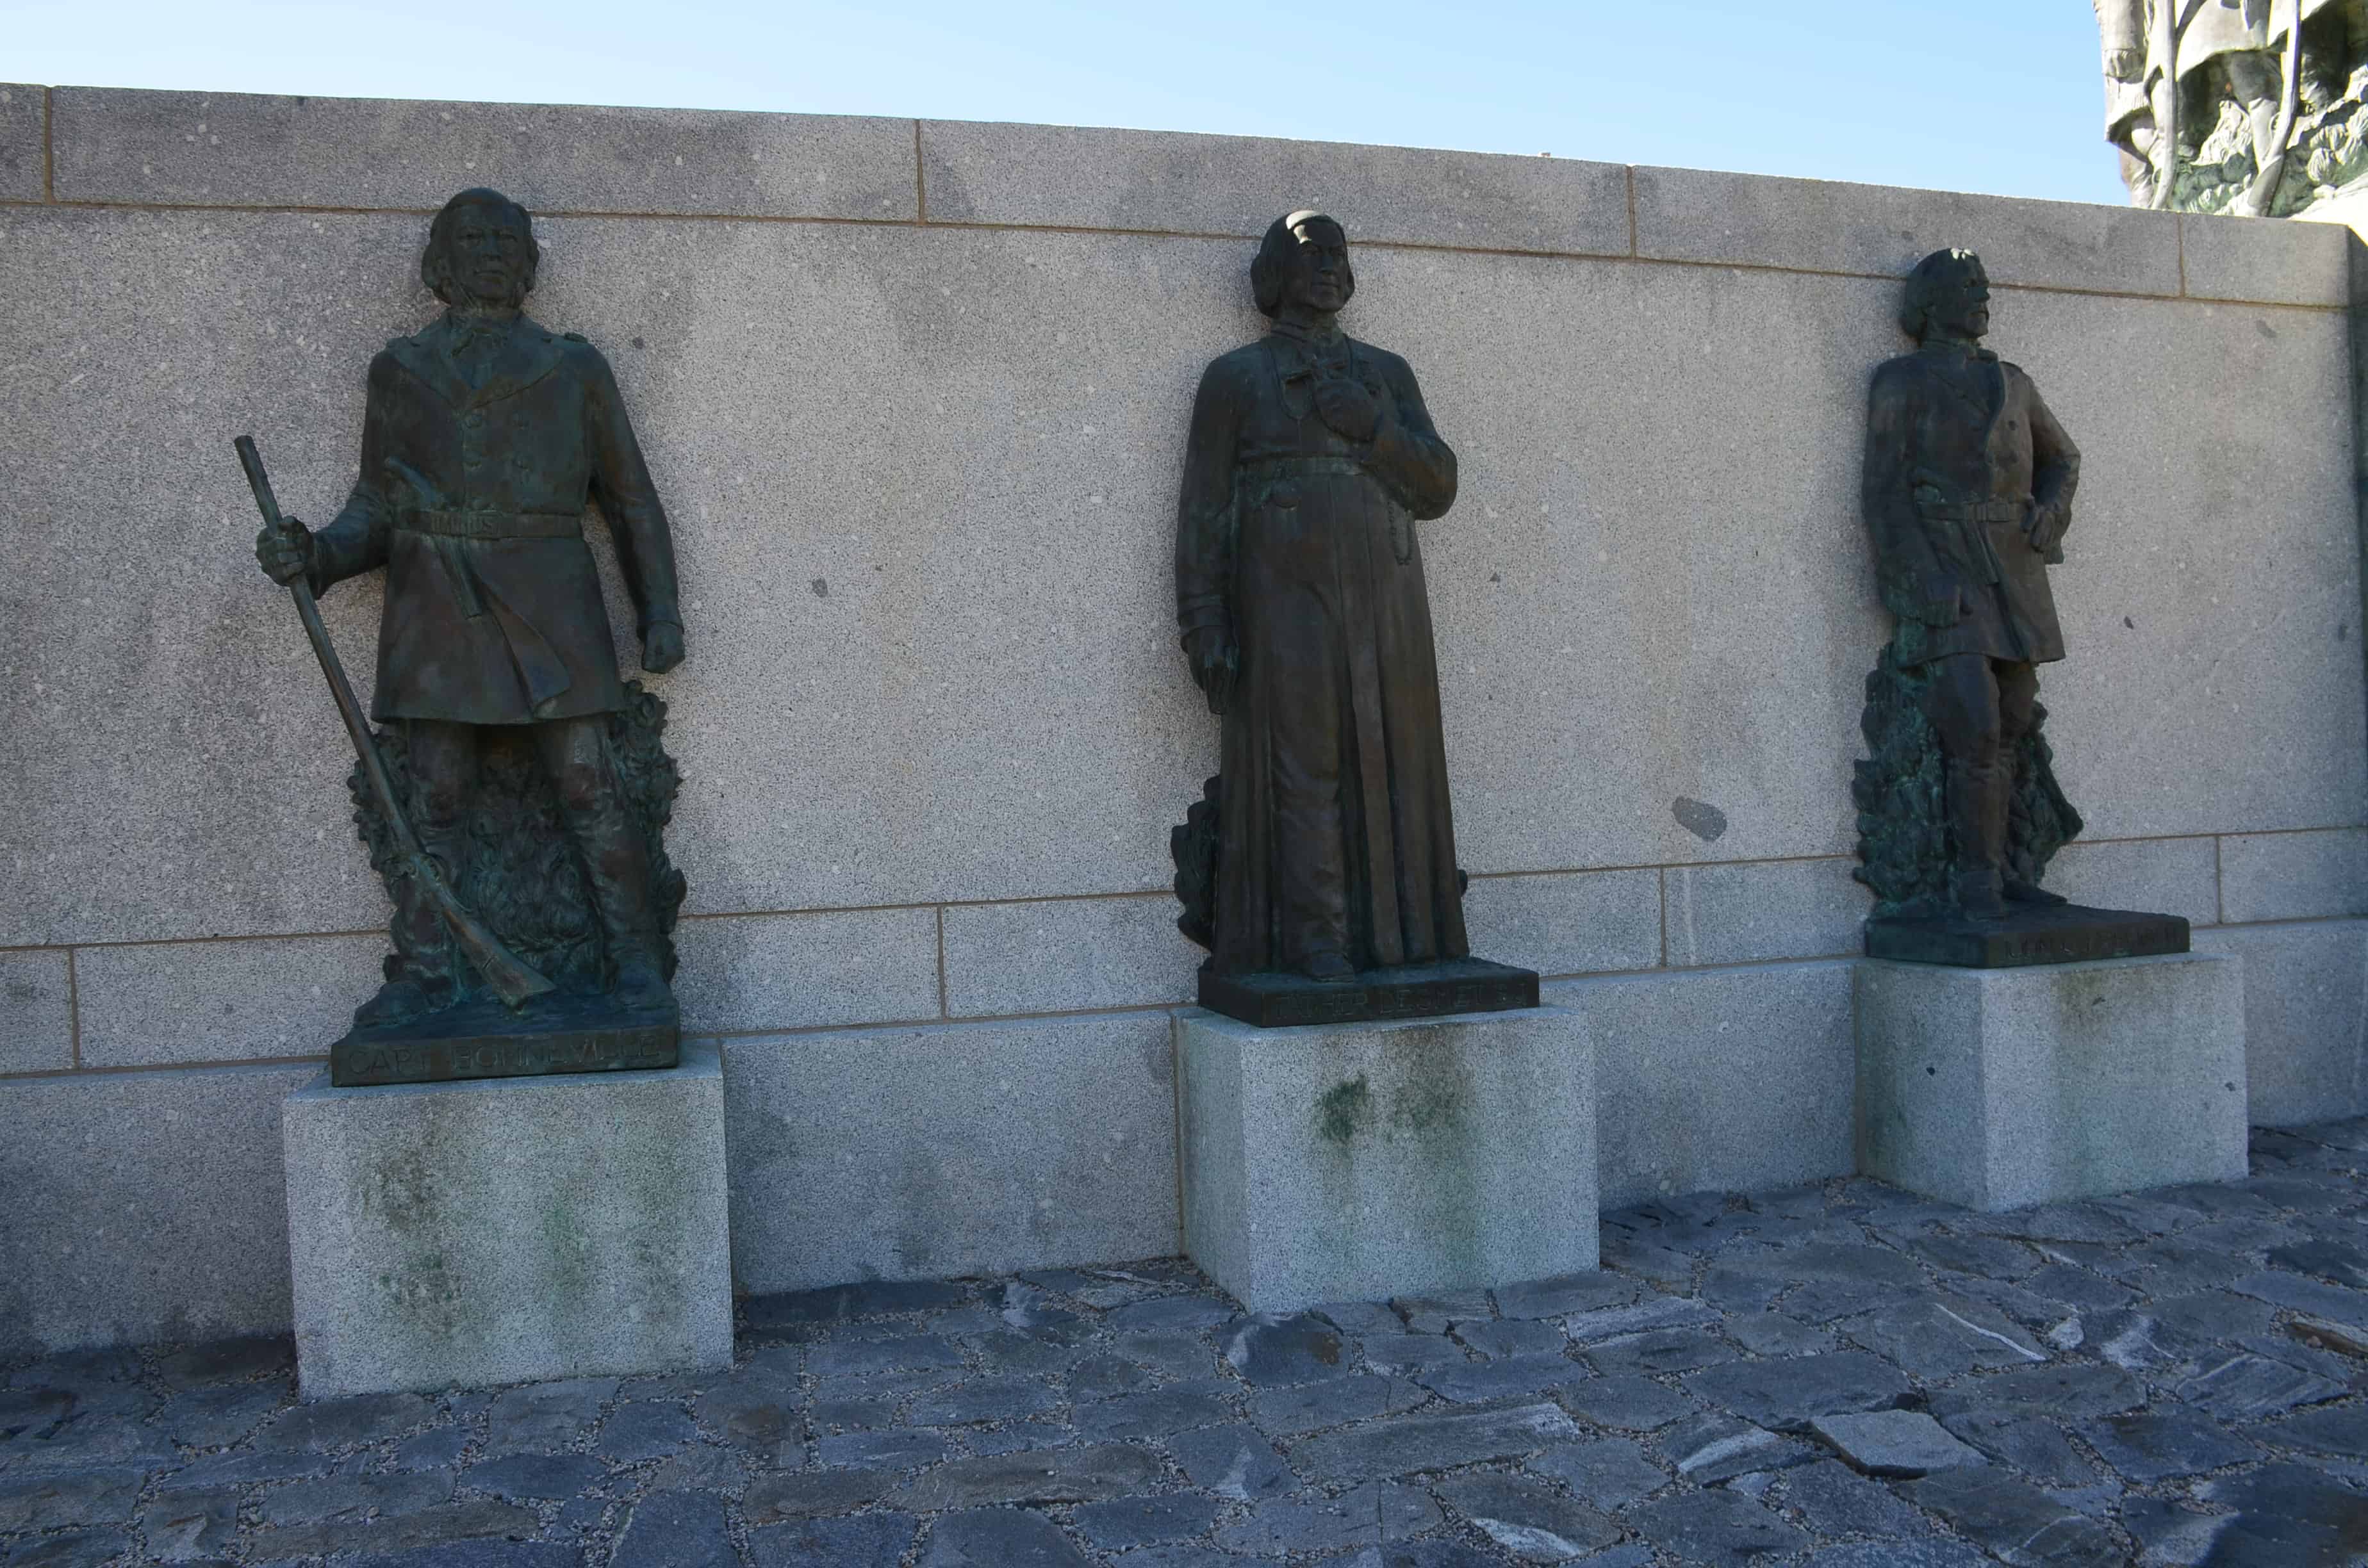 Figures on the east side on the This Is the Place Monument in Salt Lake City, Utah